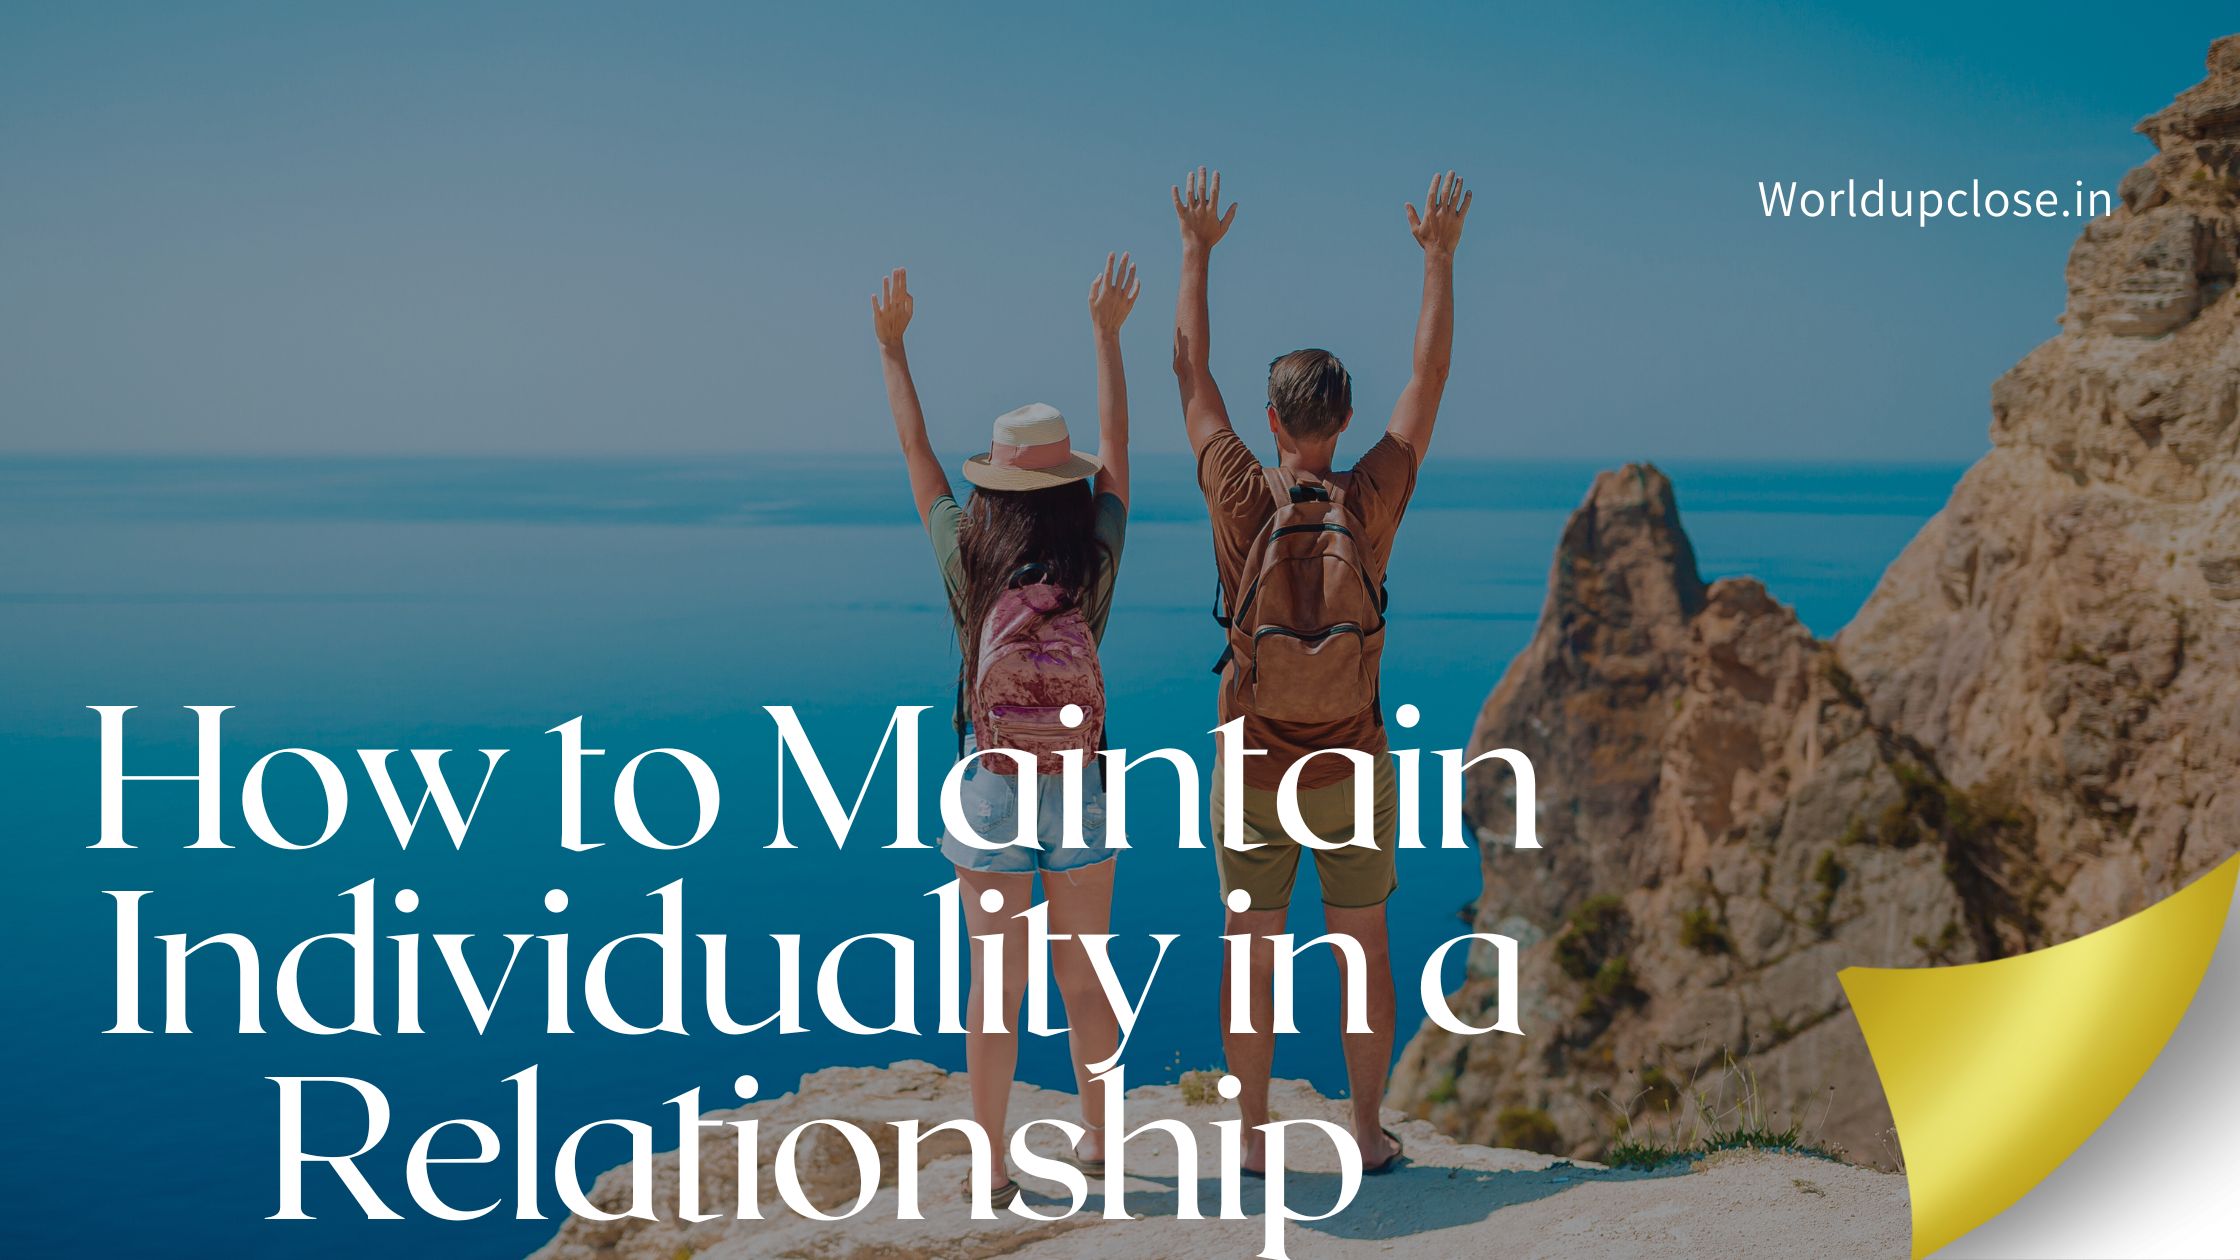 How to Maintain Individuality in a Relationship - 12 Successful Ways 8